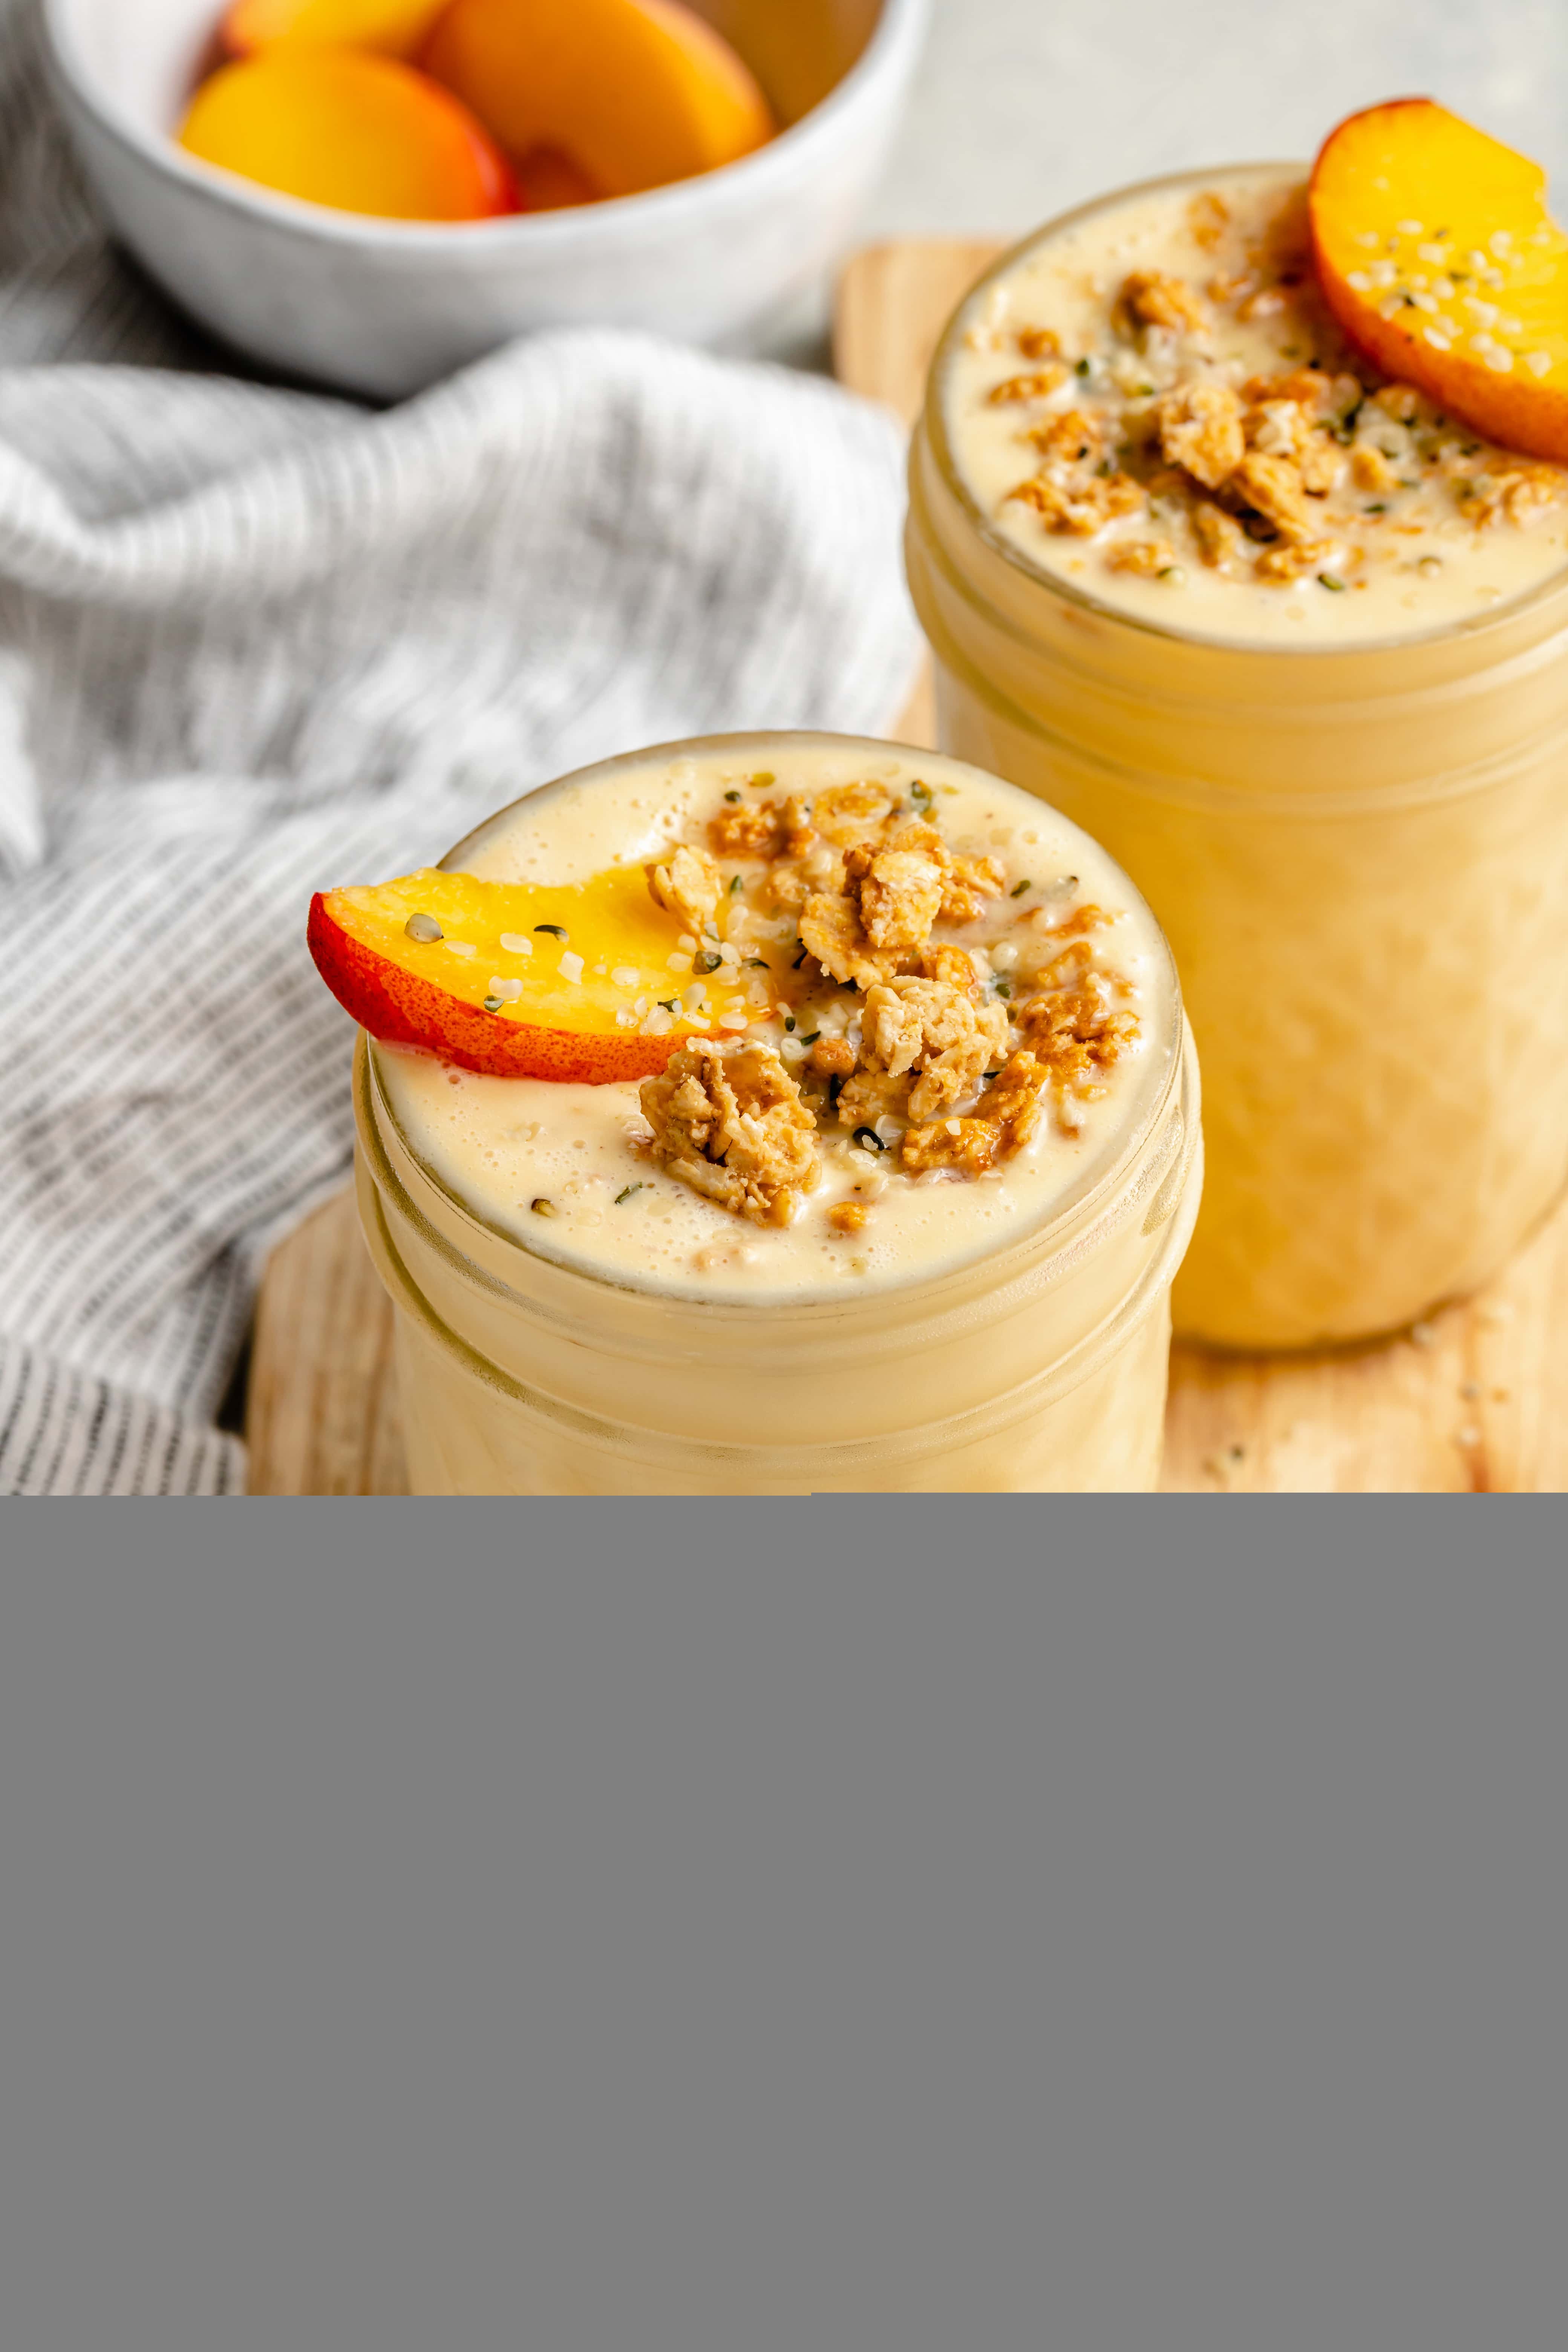 Protein Juice – Peach Perfect